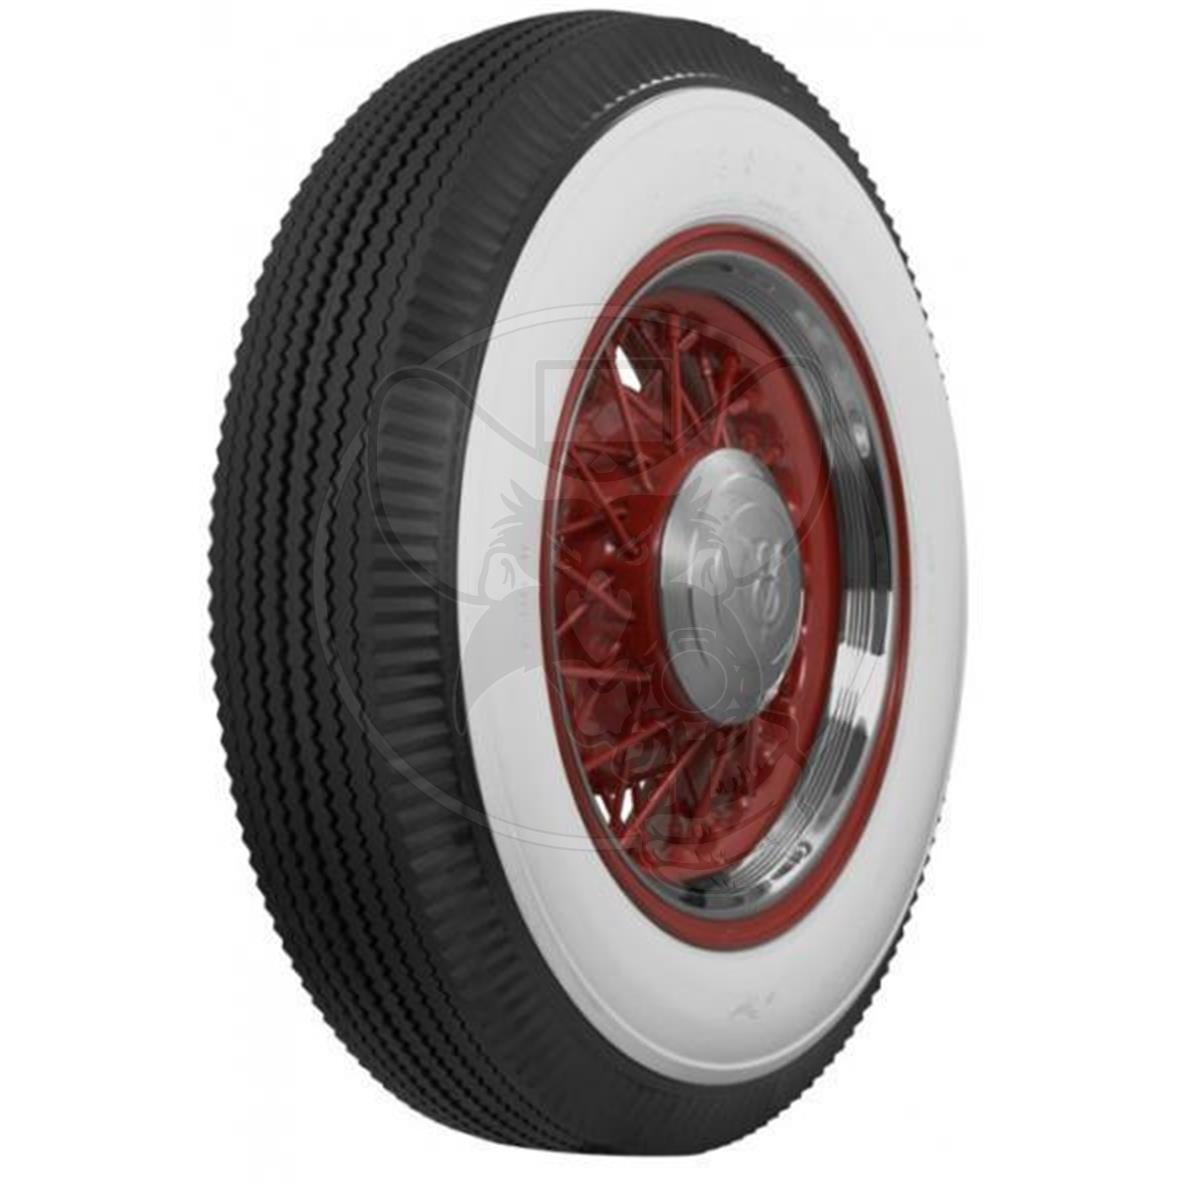 FIRESTONE TYRE BIAS PLY 8.20 X 15" WITH 3.5" WHITEWALL 29.56" OAD